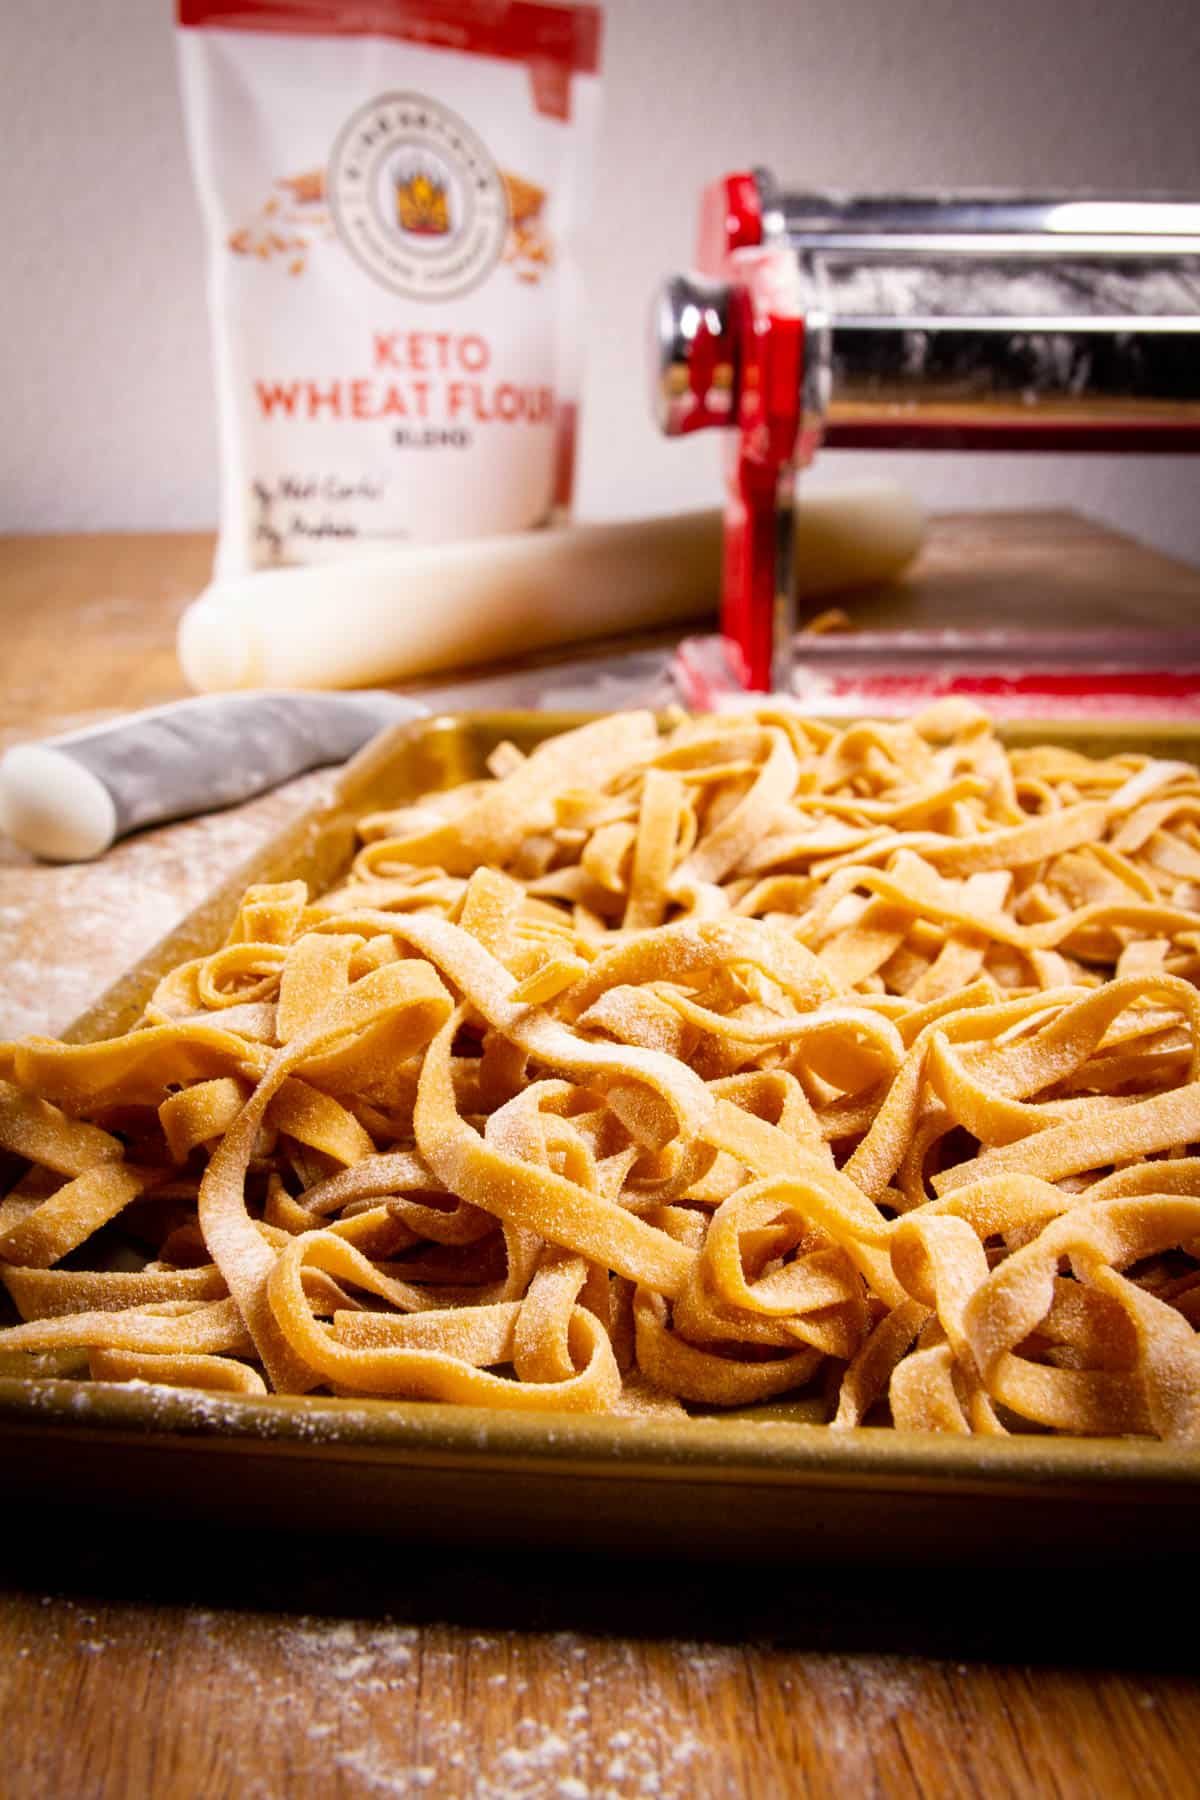 My keto pasta on a tray with the pasta machine the background.